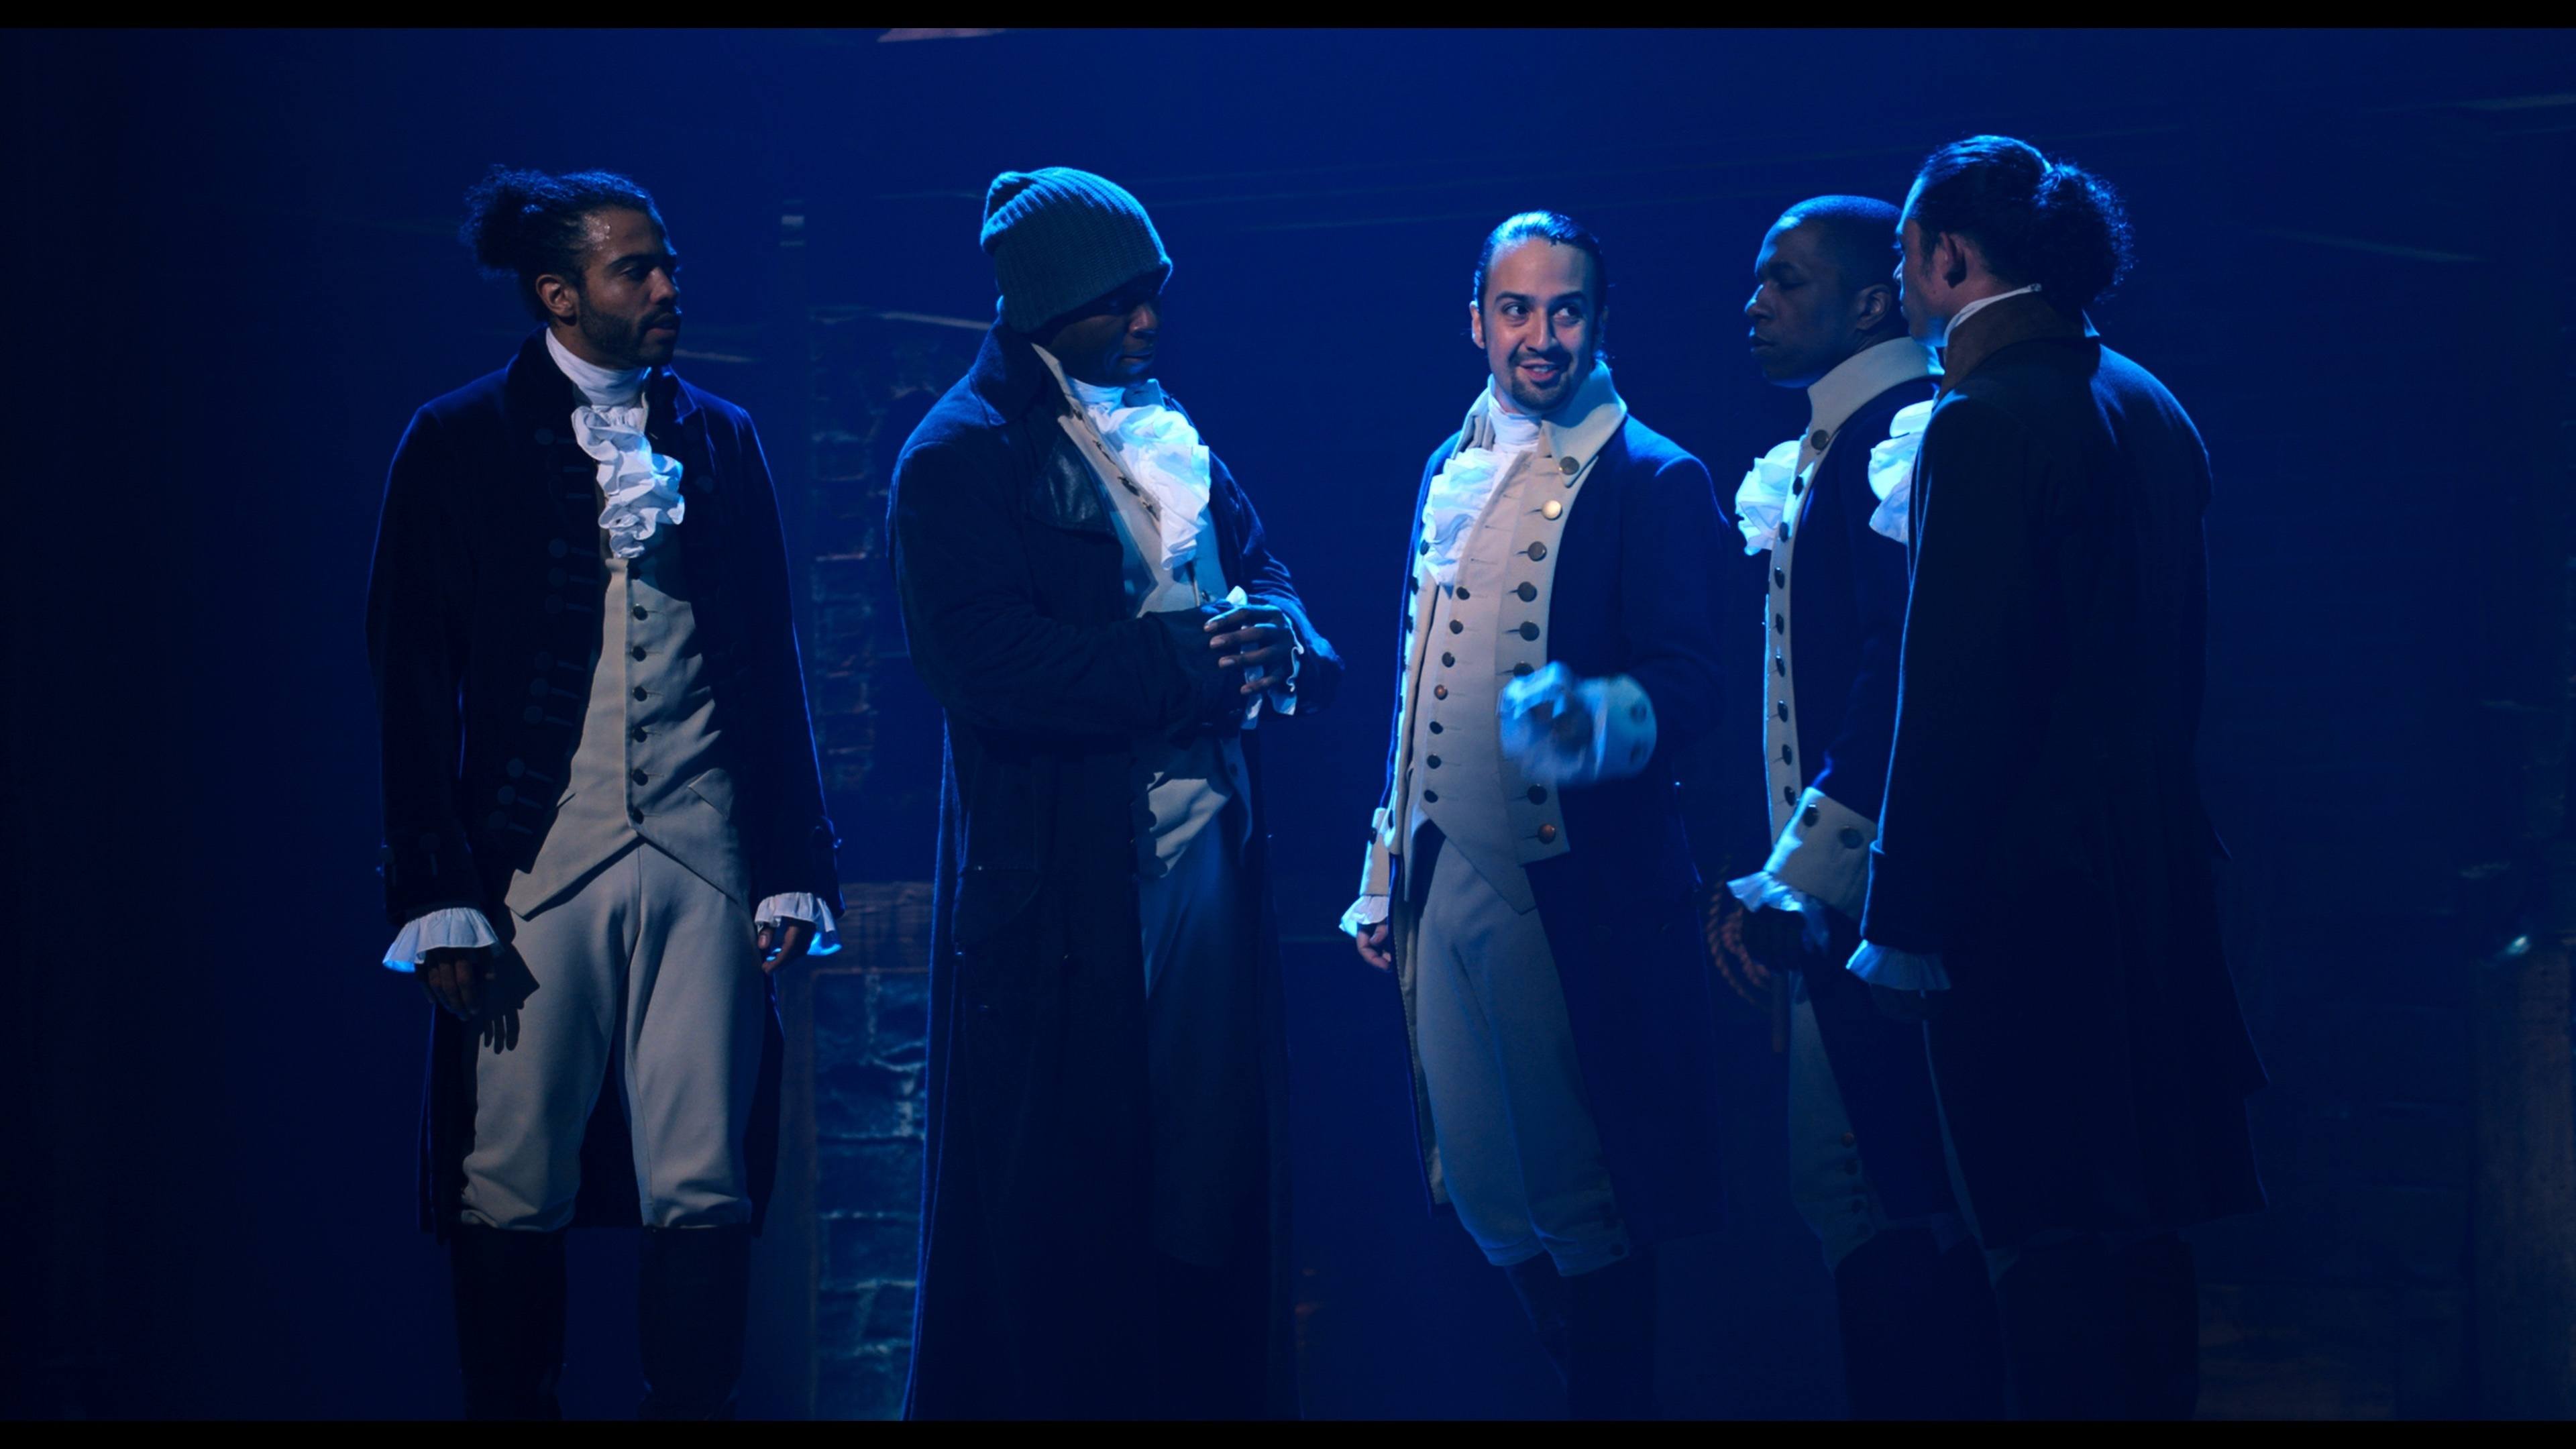 Disney+ ‘Hamilton’ Holds the Title of Most-Streamed Original Movie of 2020